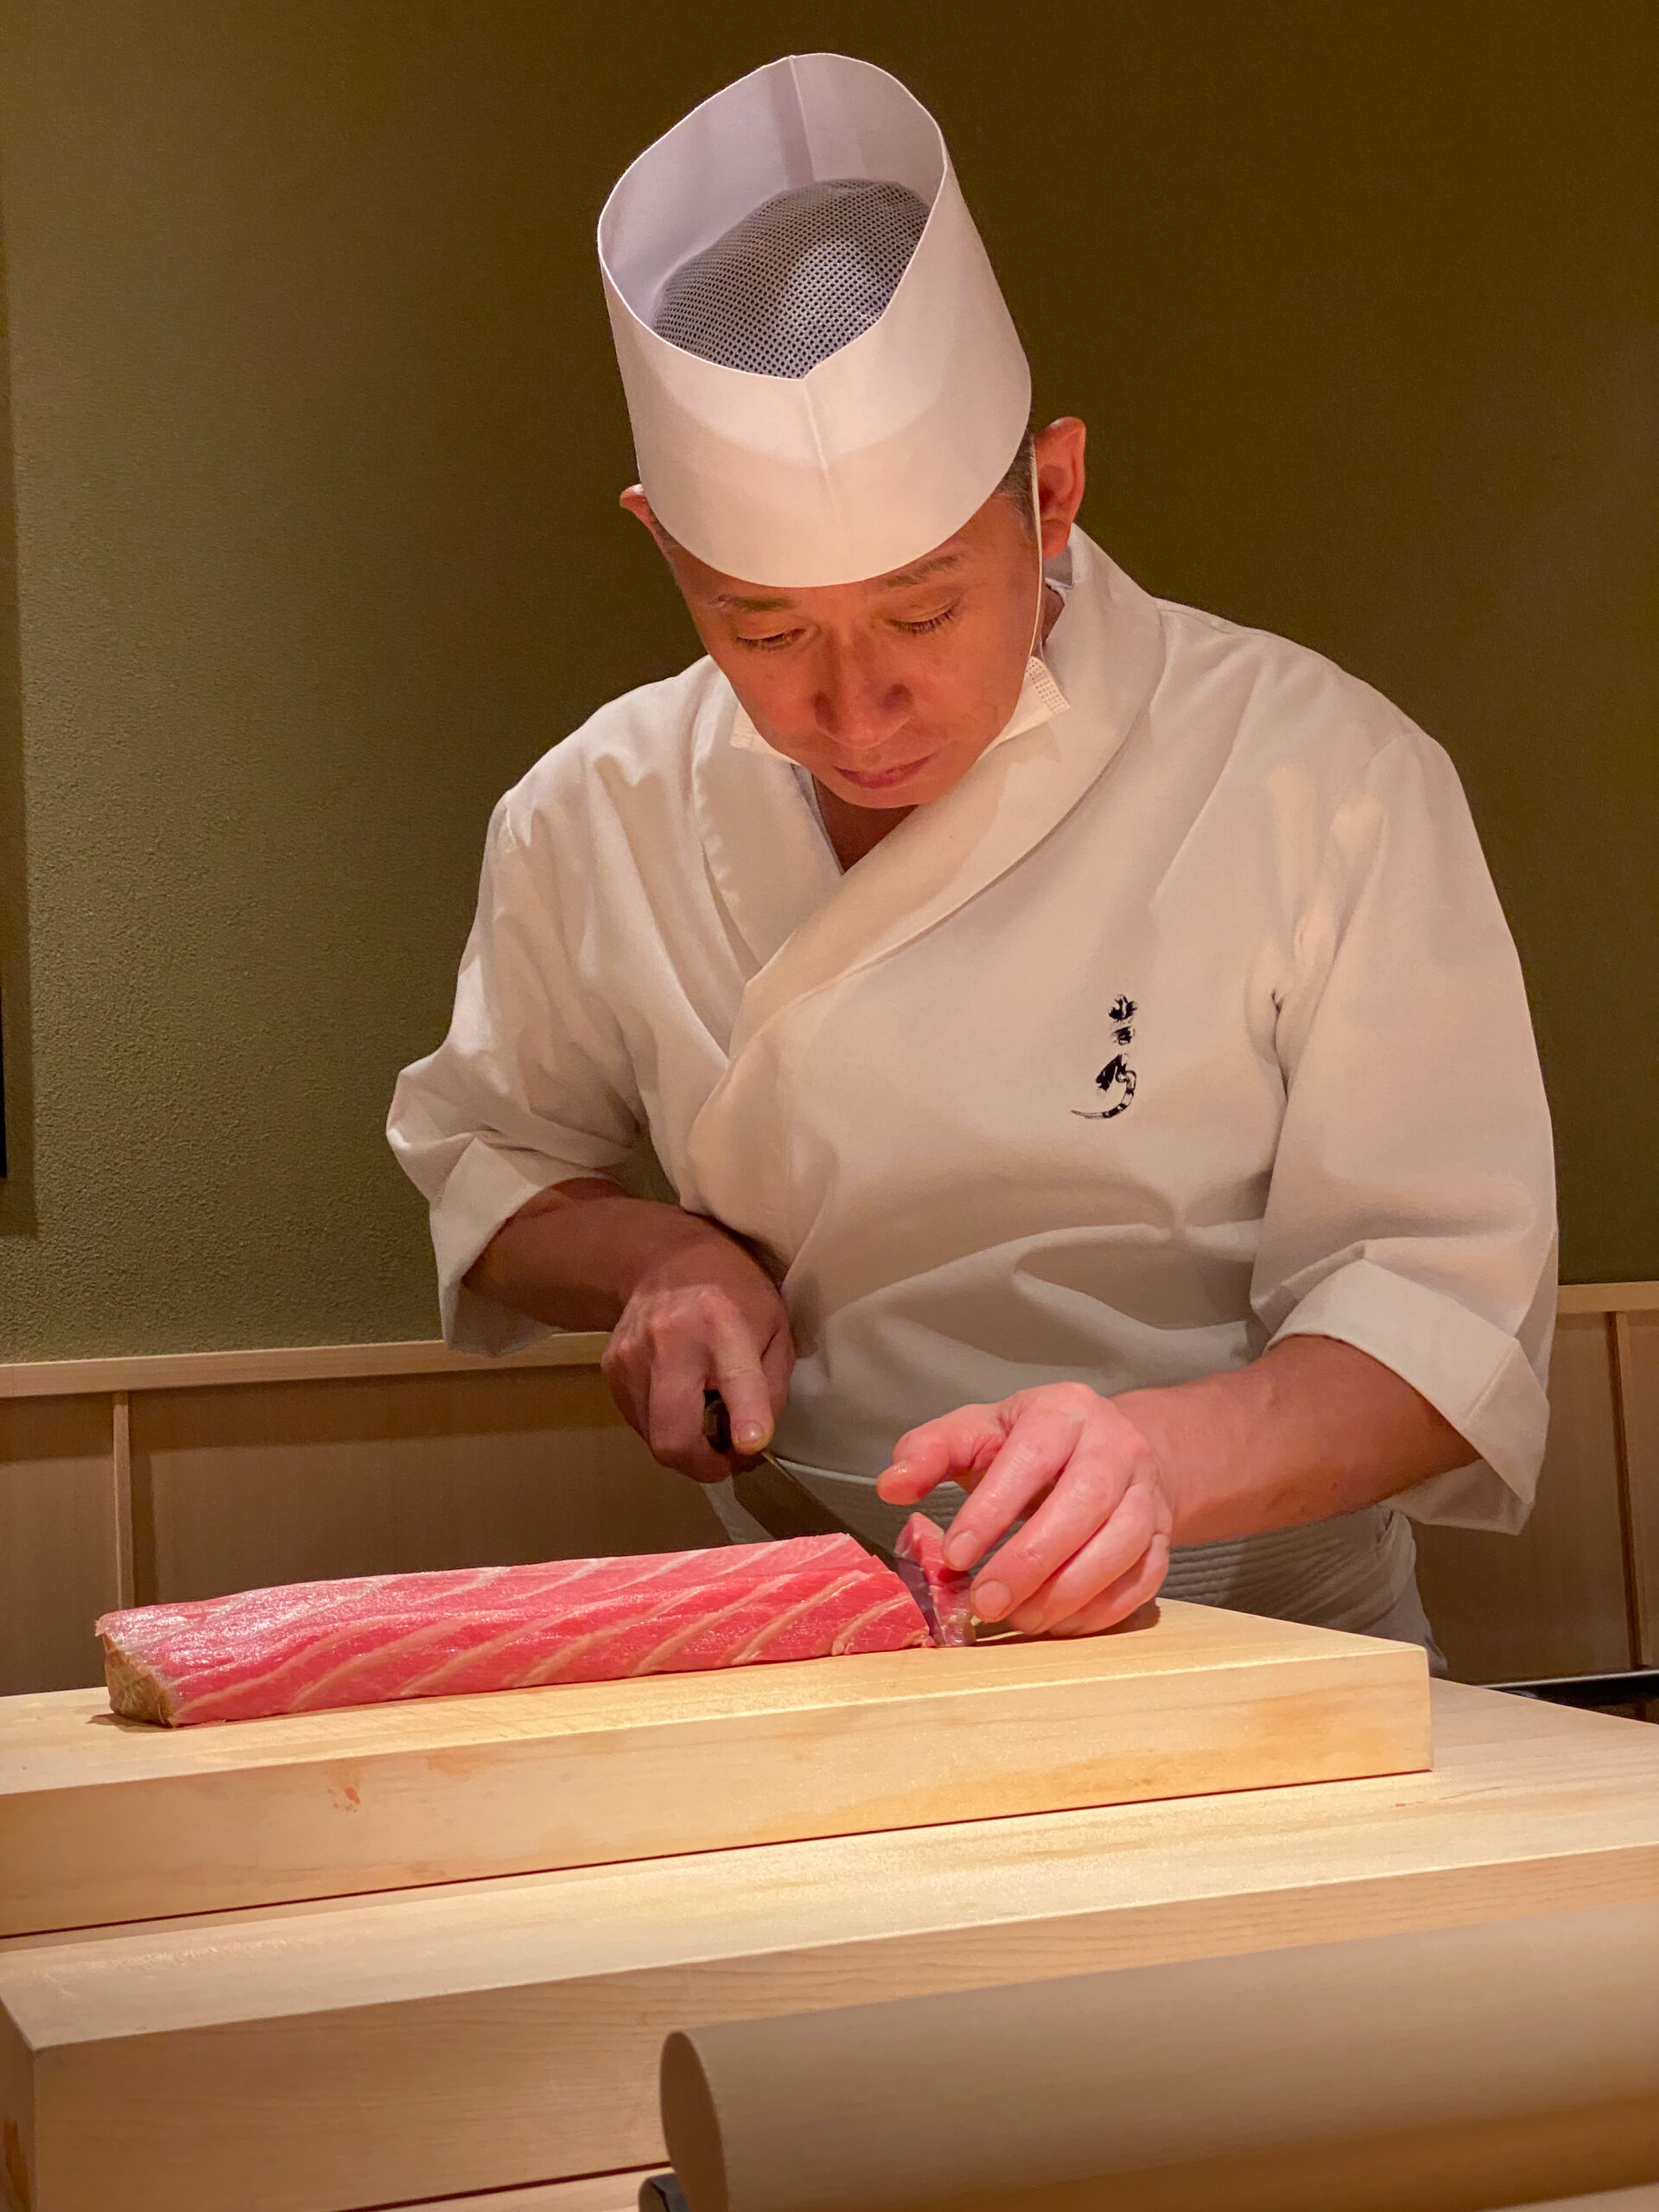 What does an Itamae Sushi Chef do? How to Become a Sushi Chef Itamae